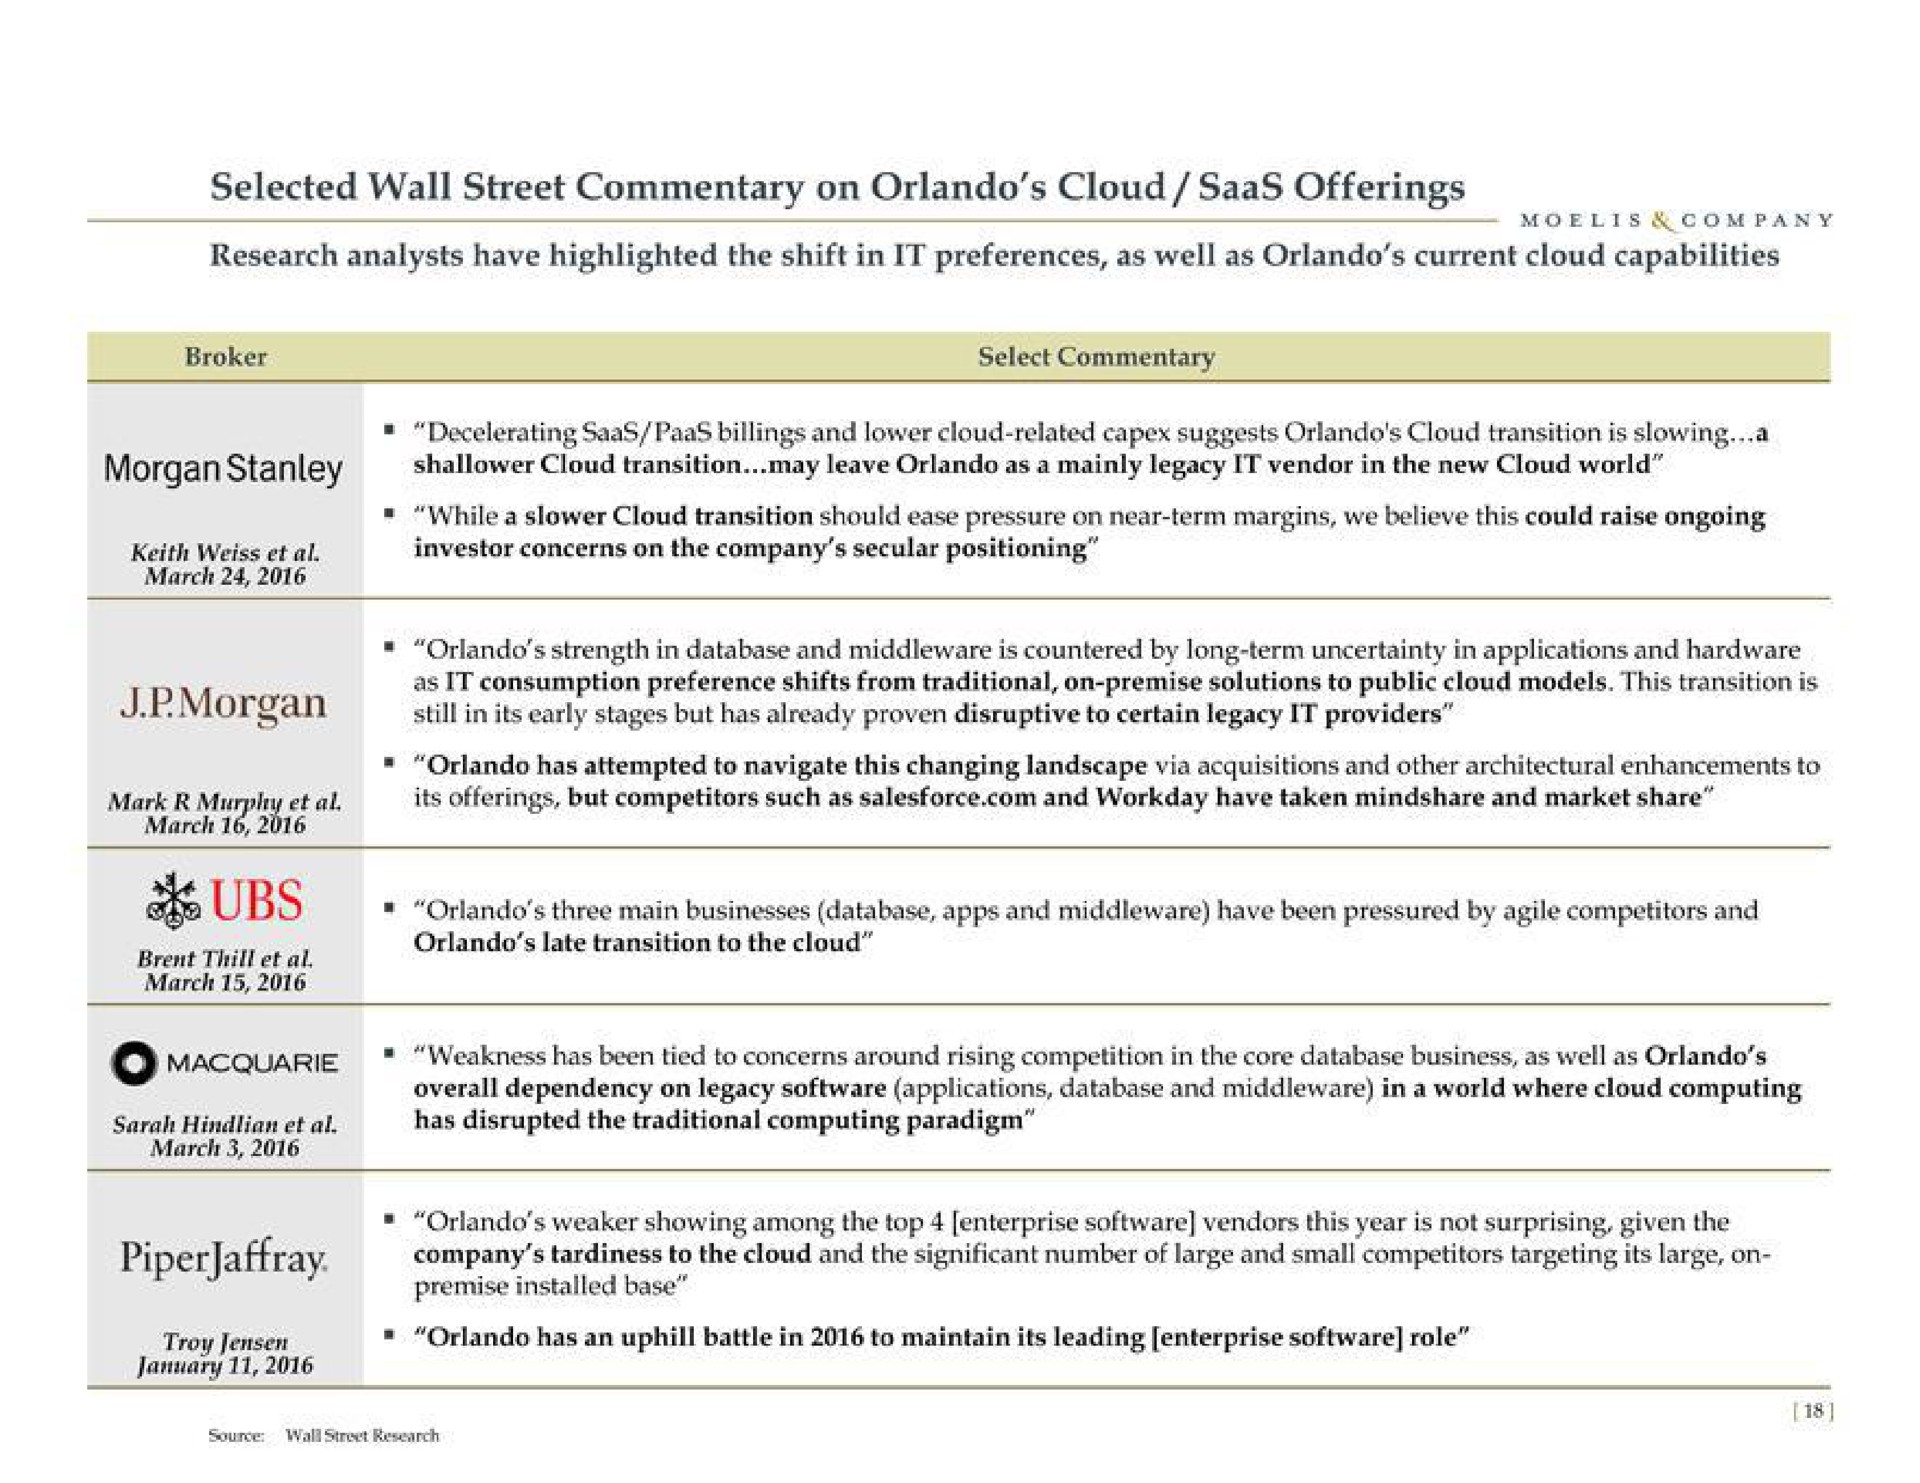 selected wall street commentary on cloud offerings research analysts have highlighted the shift in it preferences as well as current cloud capabilities morgan | Moelis & Company